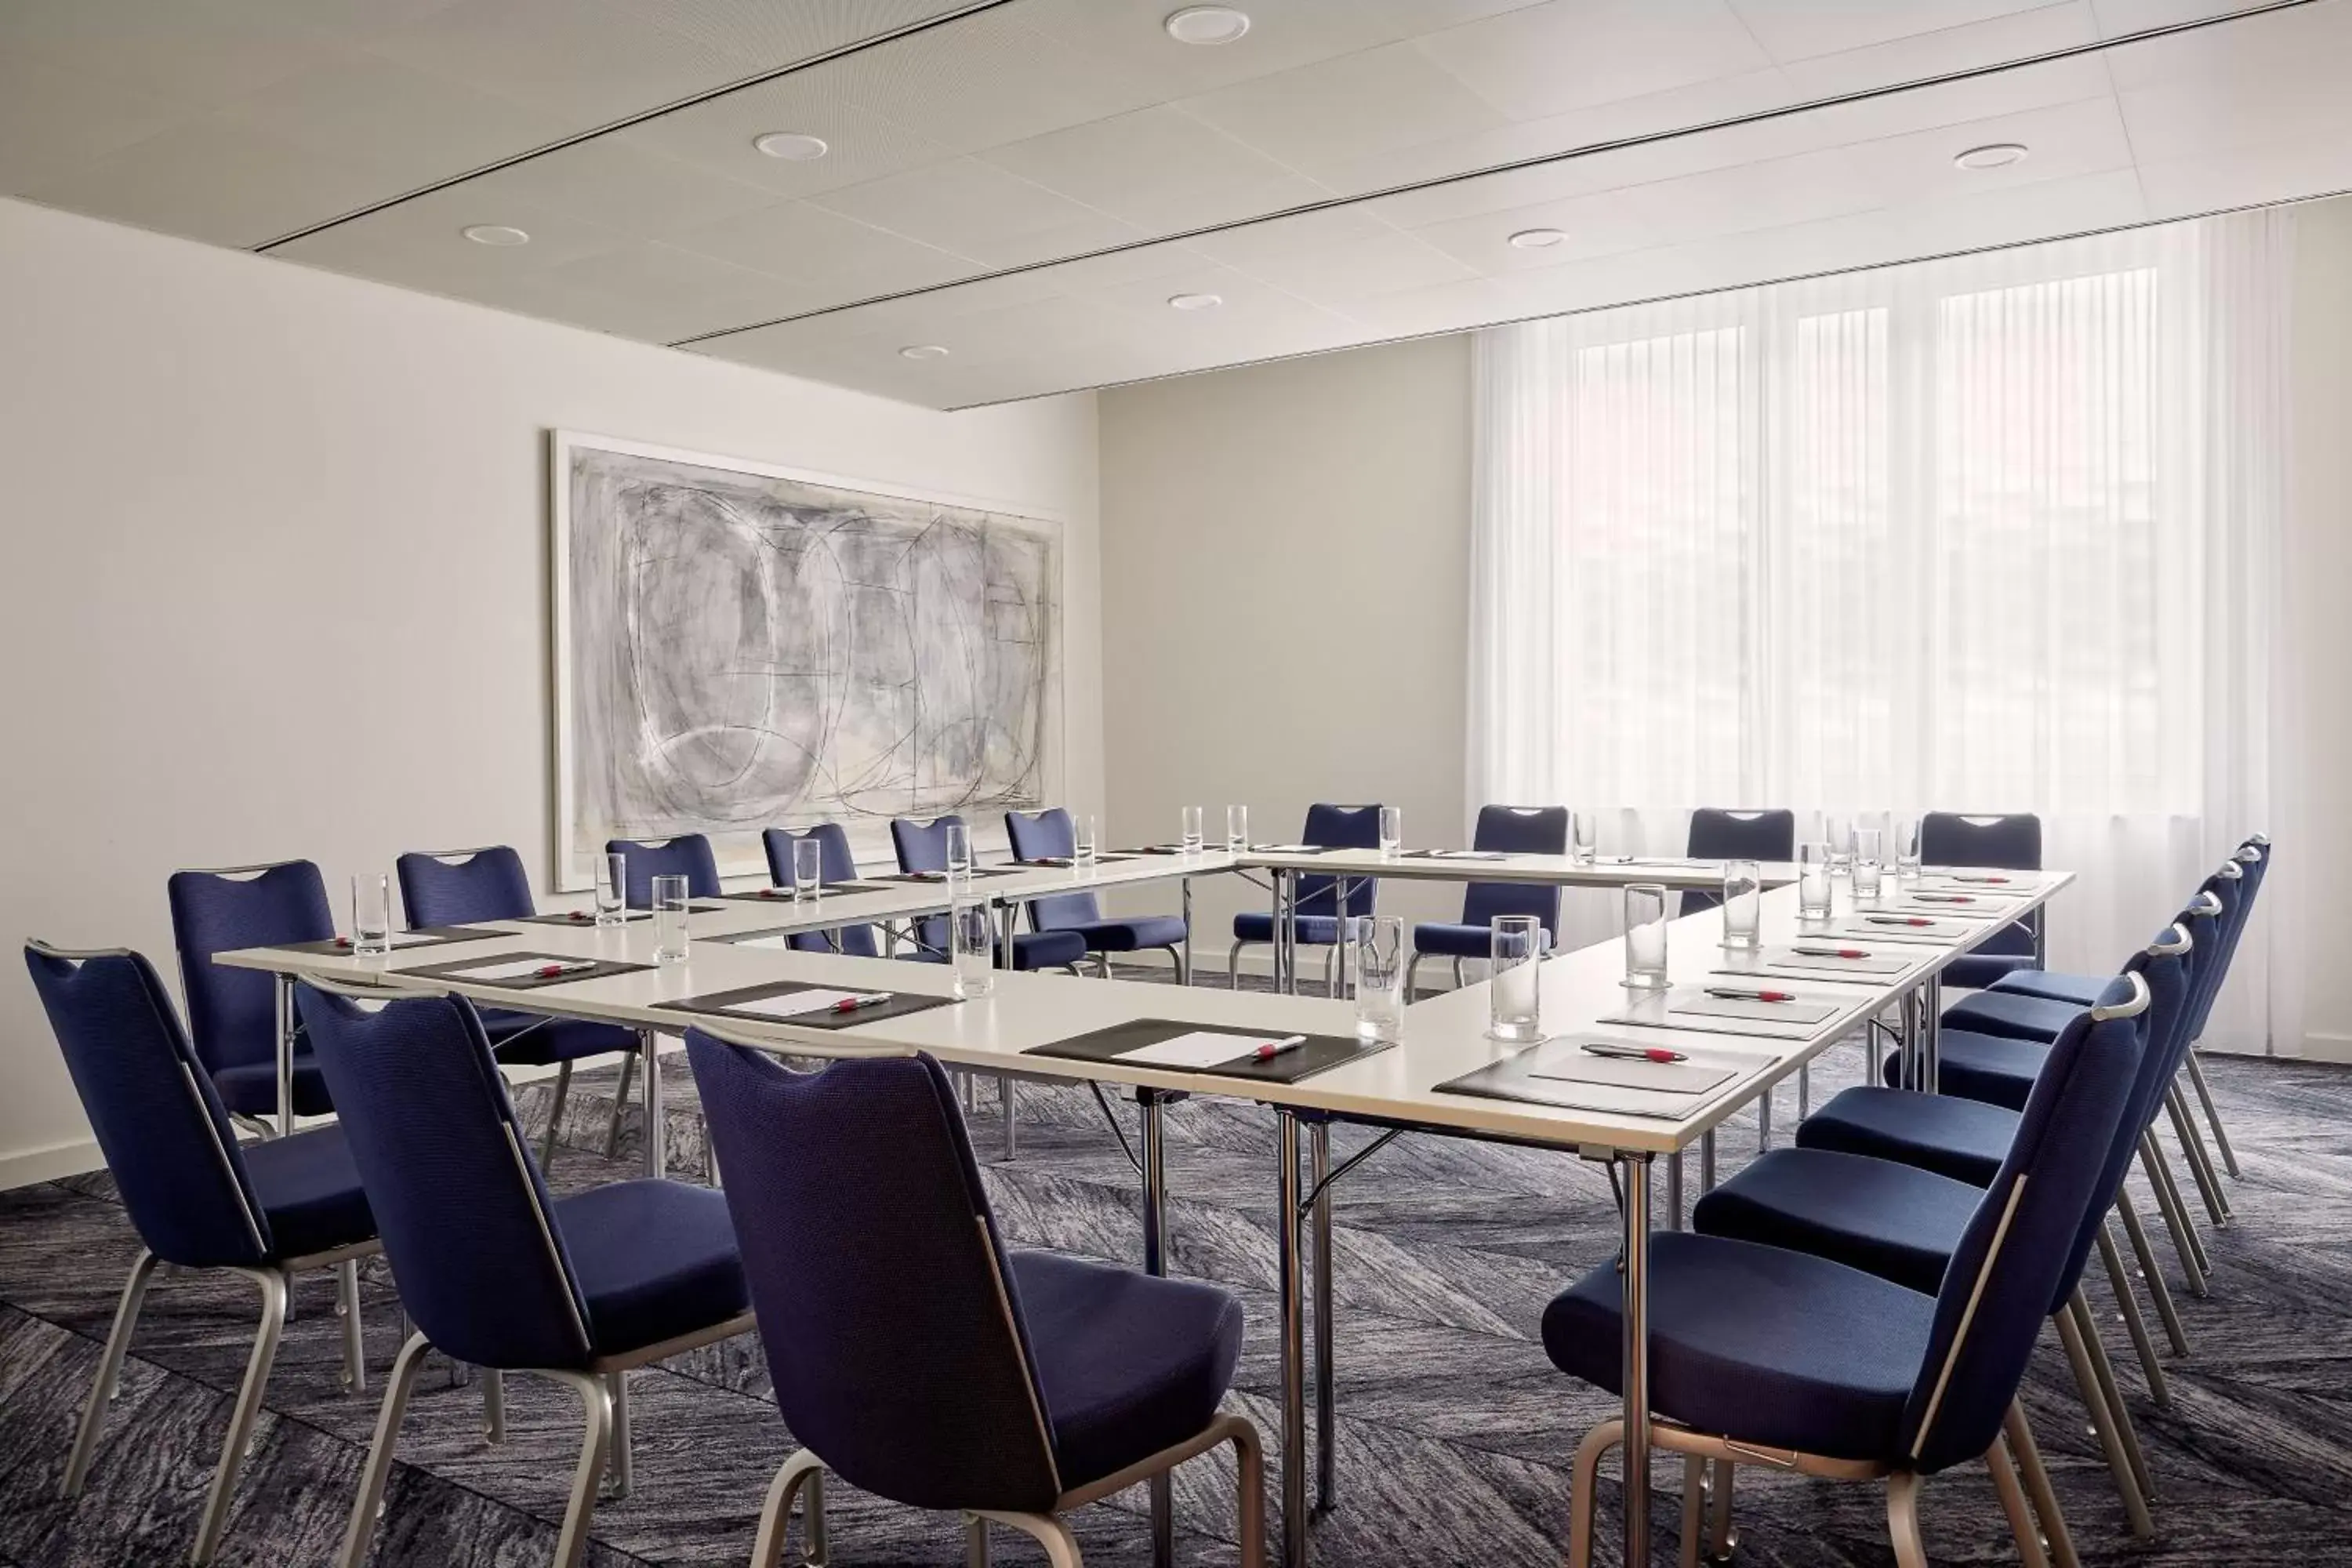 Meeting/conference room in Basel Marriott Hotel